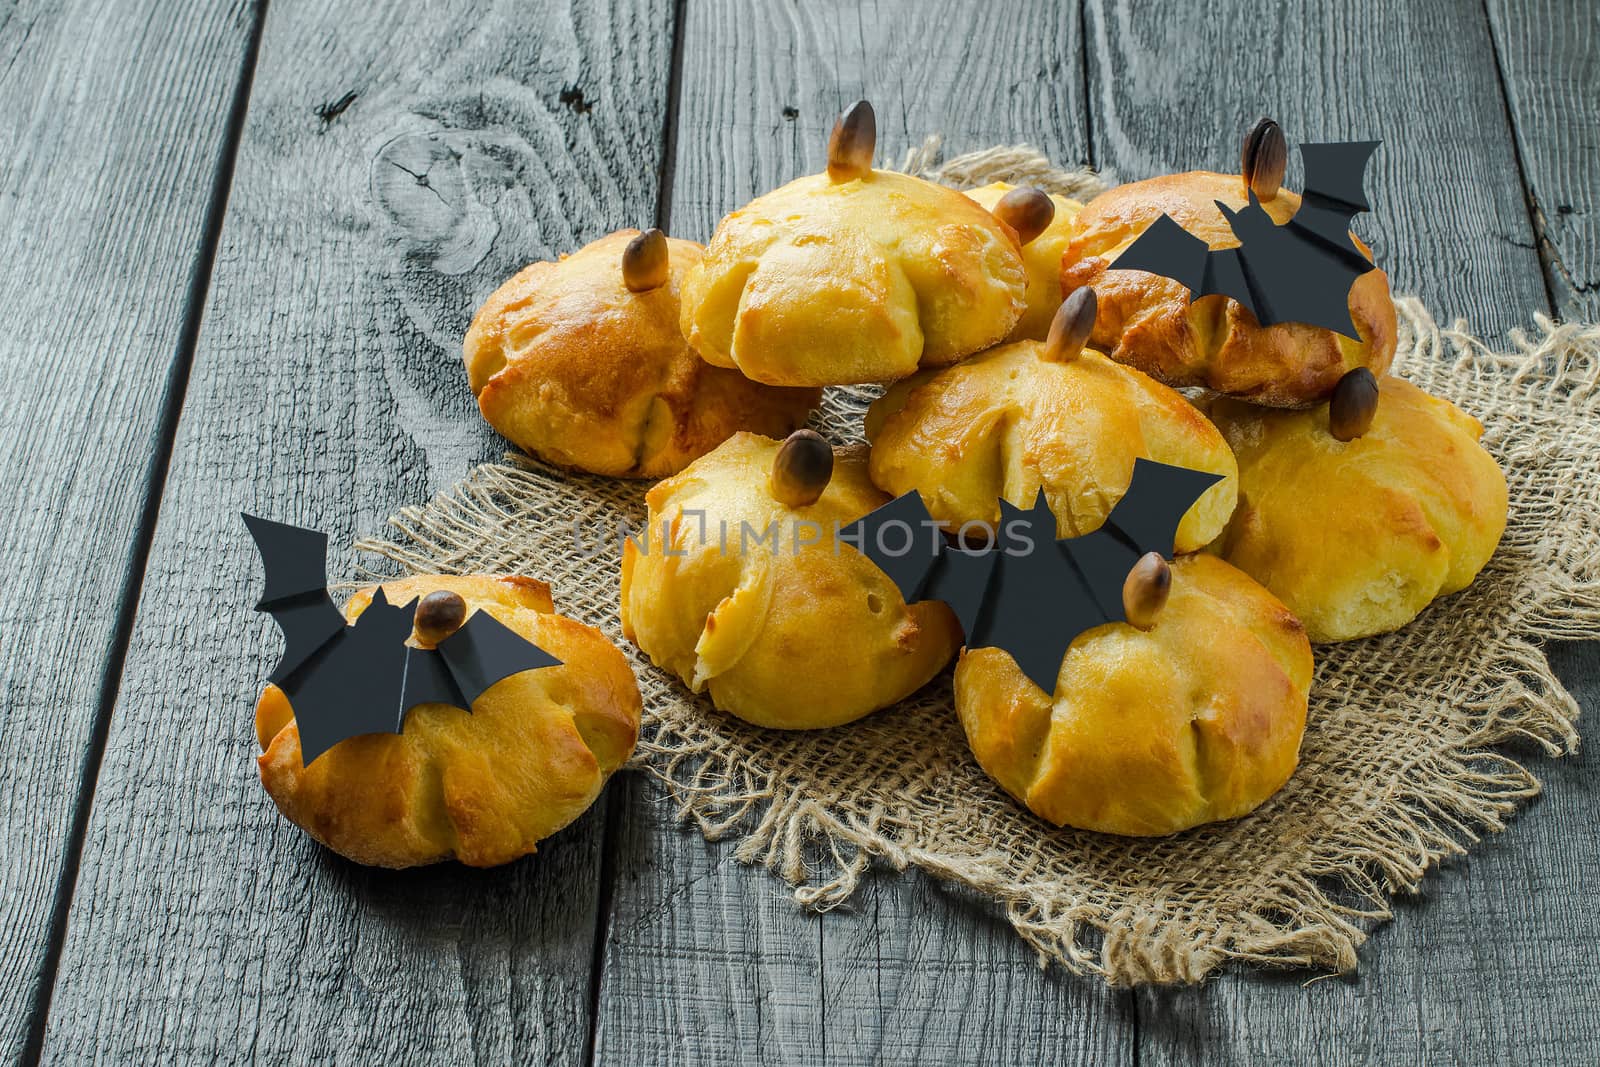 Homemade sweet pumpkin buns. Original baking in form of pumpkin and bats made of paper. Symbols and characters Halloween. Idea of design meal for Halloween party. Scary and funny Halloween food